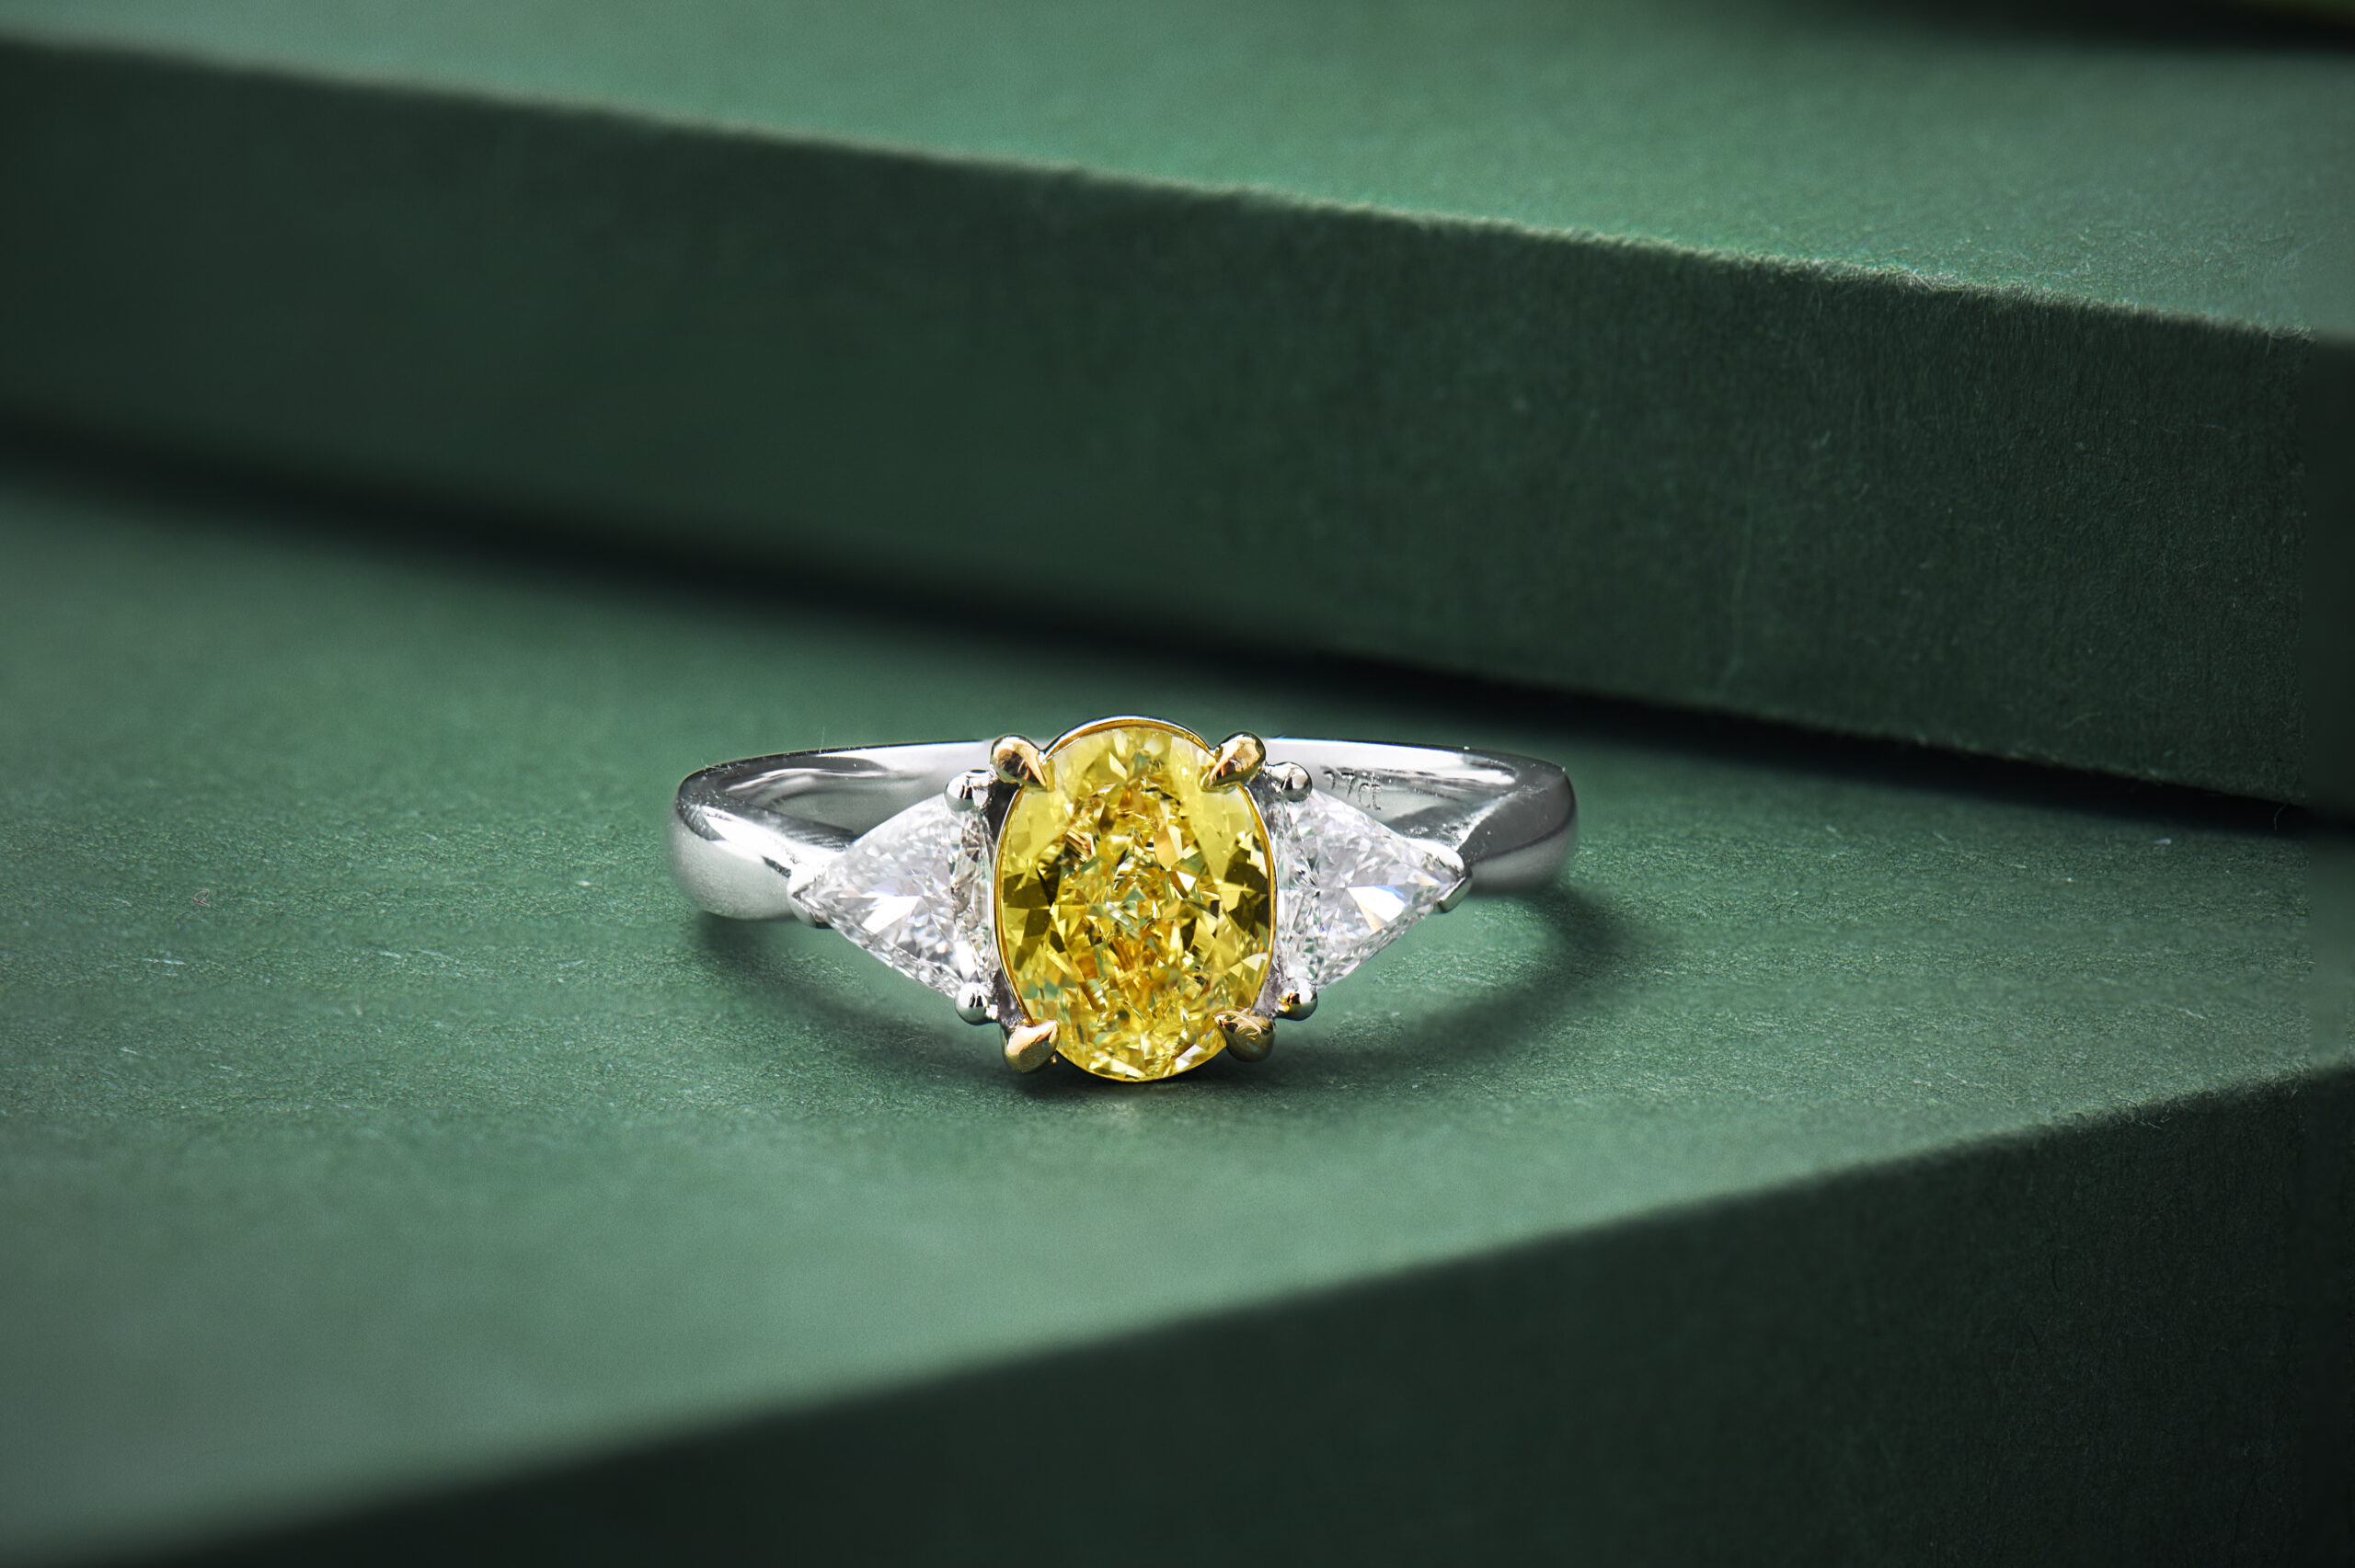 Yellow Diamond Engagement Ring Designs She'll Definitely Say Yes To